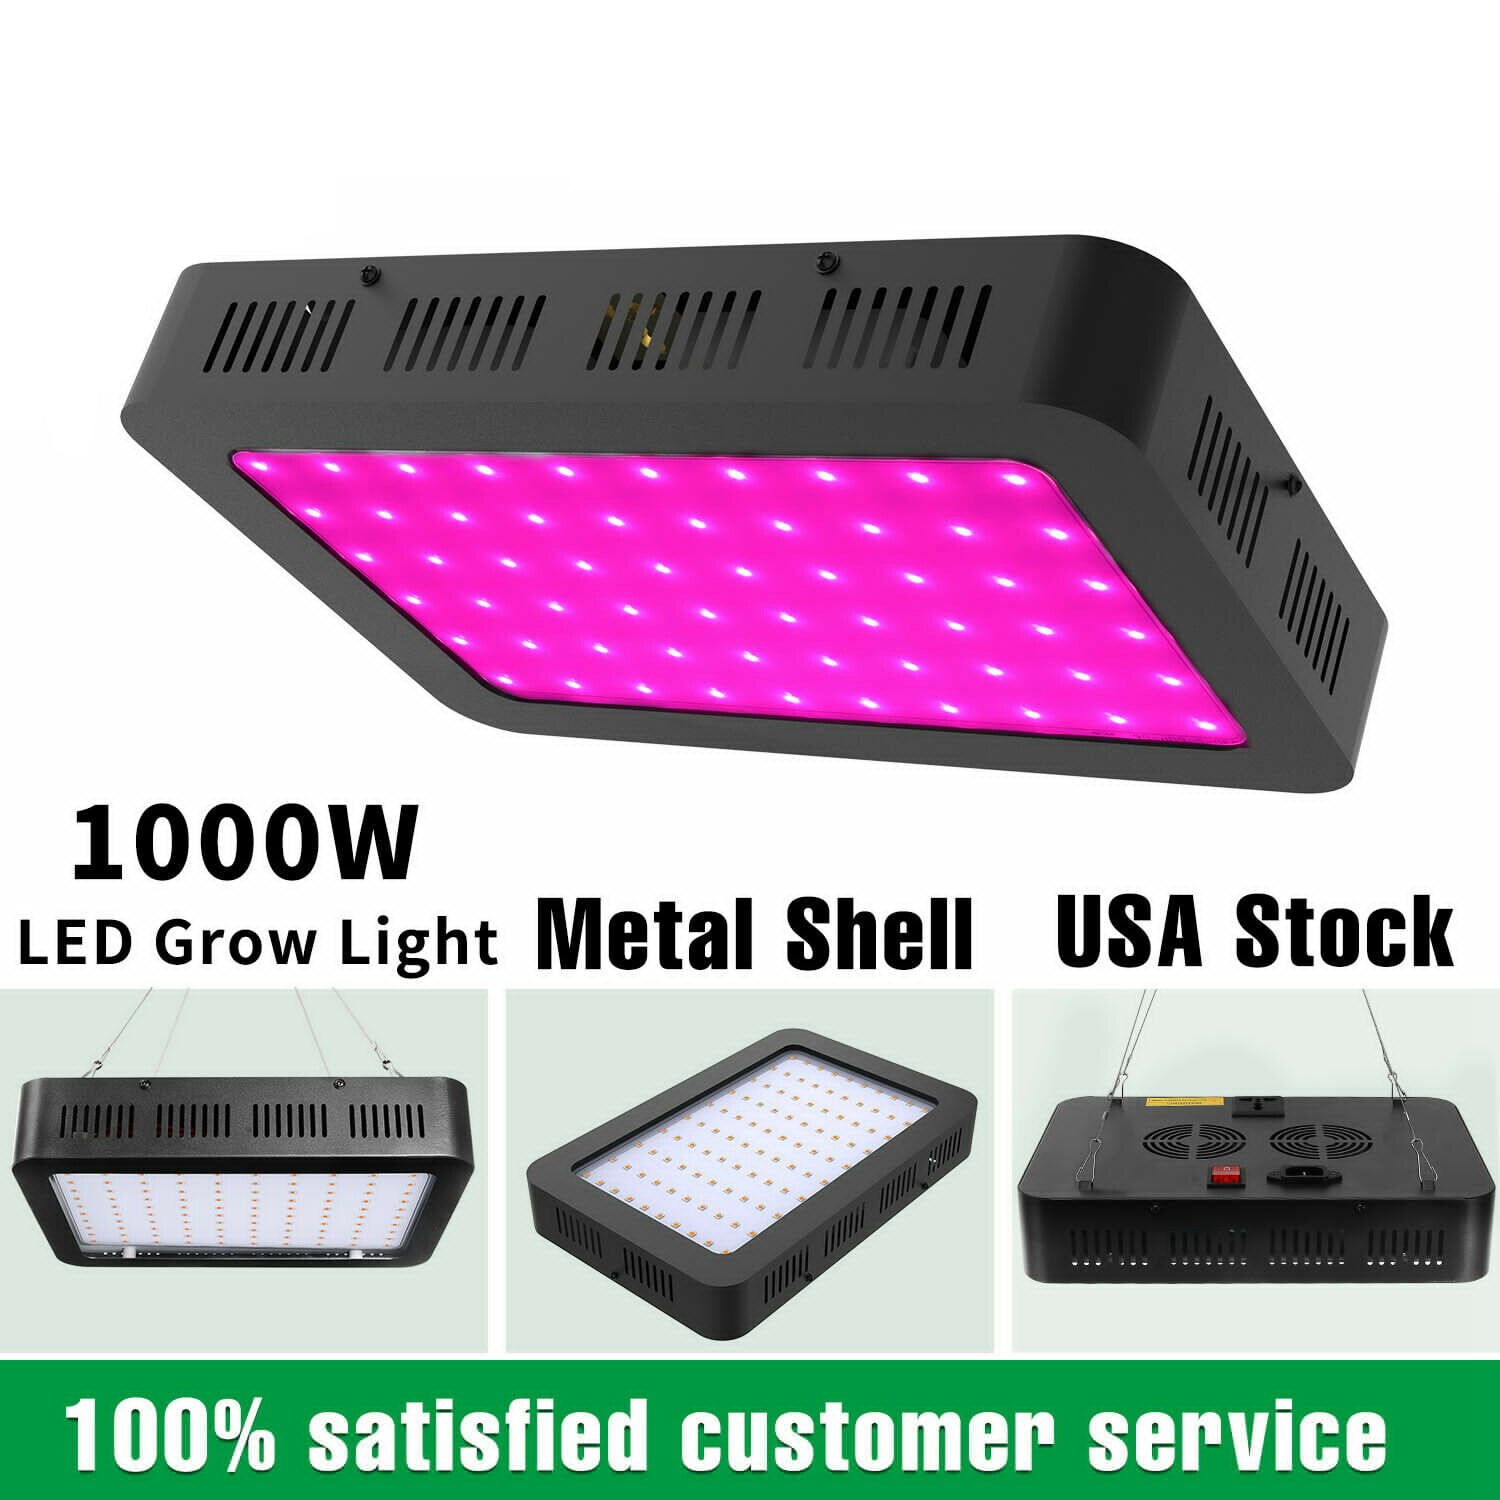 1000W LED Grow Light Indoor Seedling Veg and Bloom Plant Growing Lamp Panel MA 